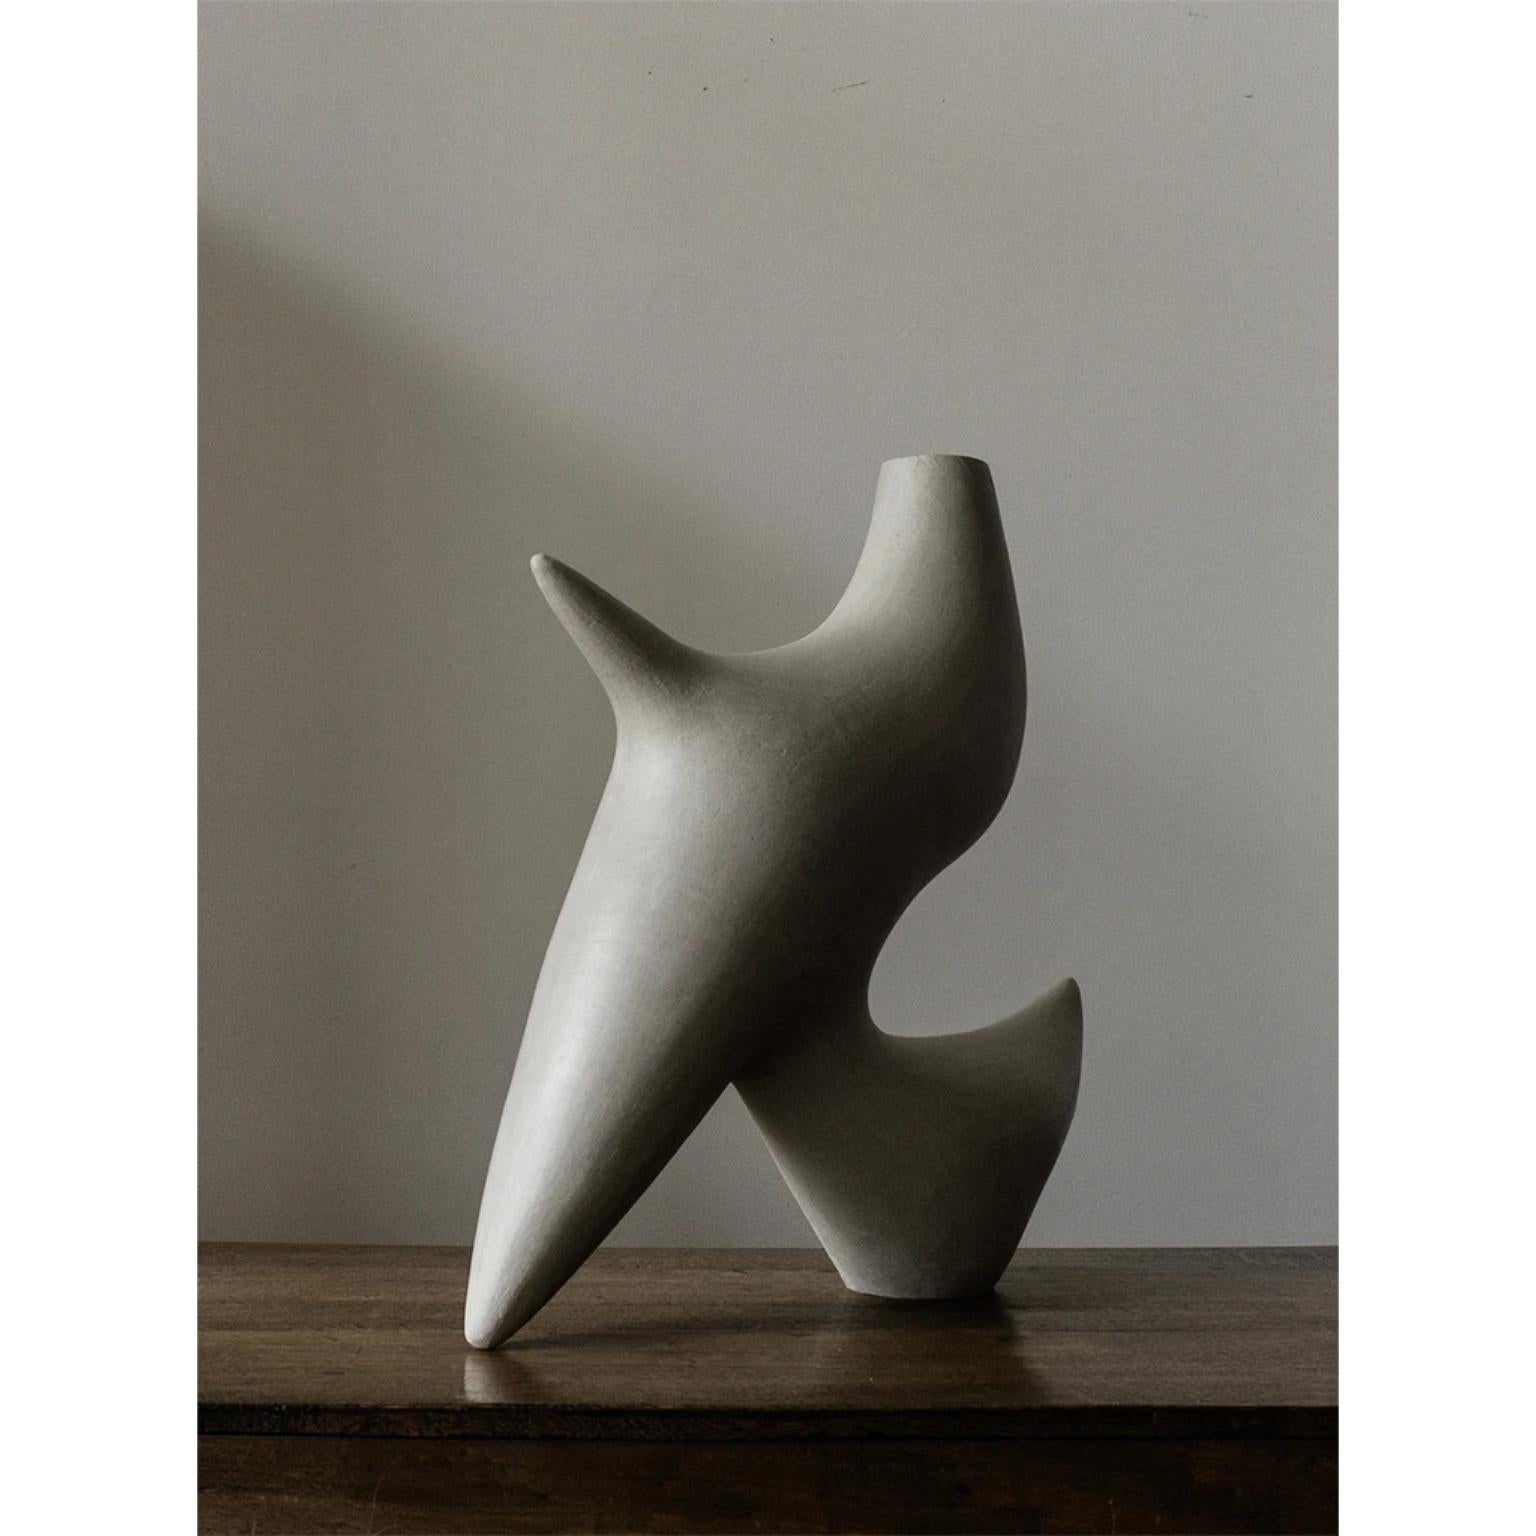 Dove vase by Cosmin Florea
Unique piece
Dimensions: W 40 x D 15 x H 45 cm
Materials: Stoneware

Inspired by my love for pristine nature, this sculptural vase channels the shape of a dove.
Handcrafted in white stoneware, the Dove vase can be used as